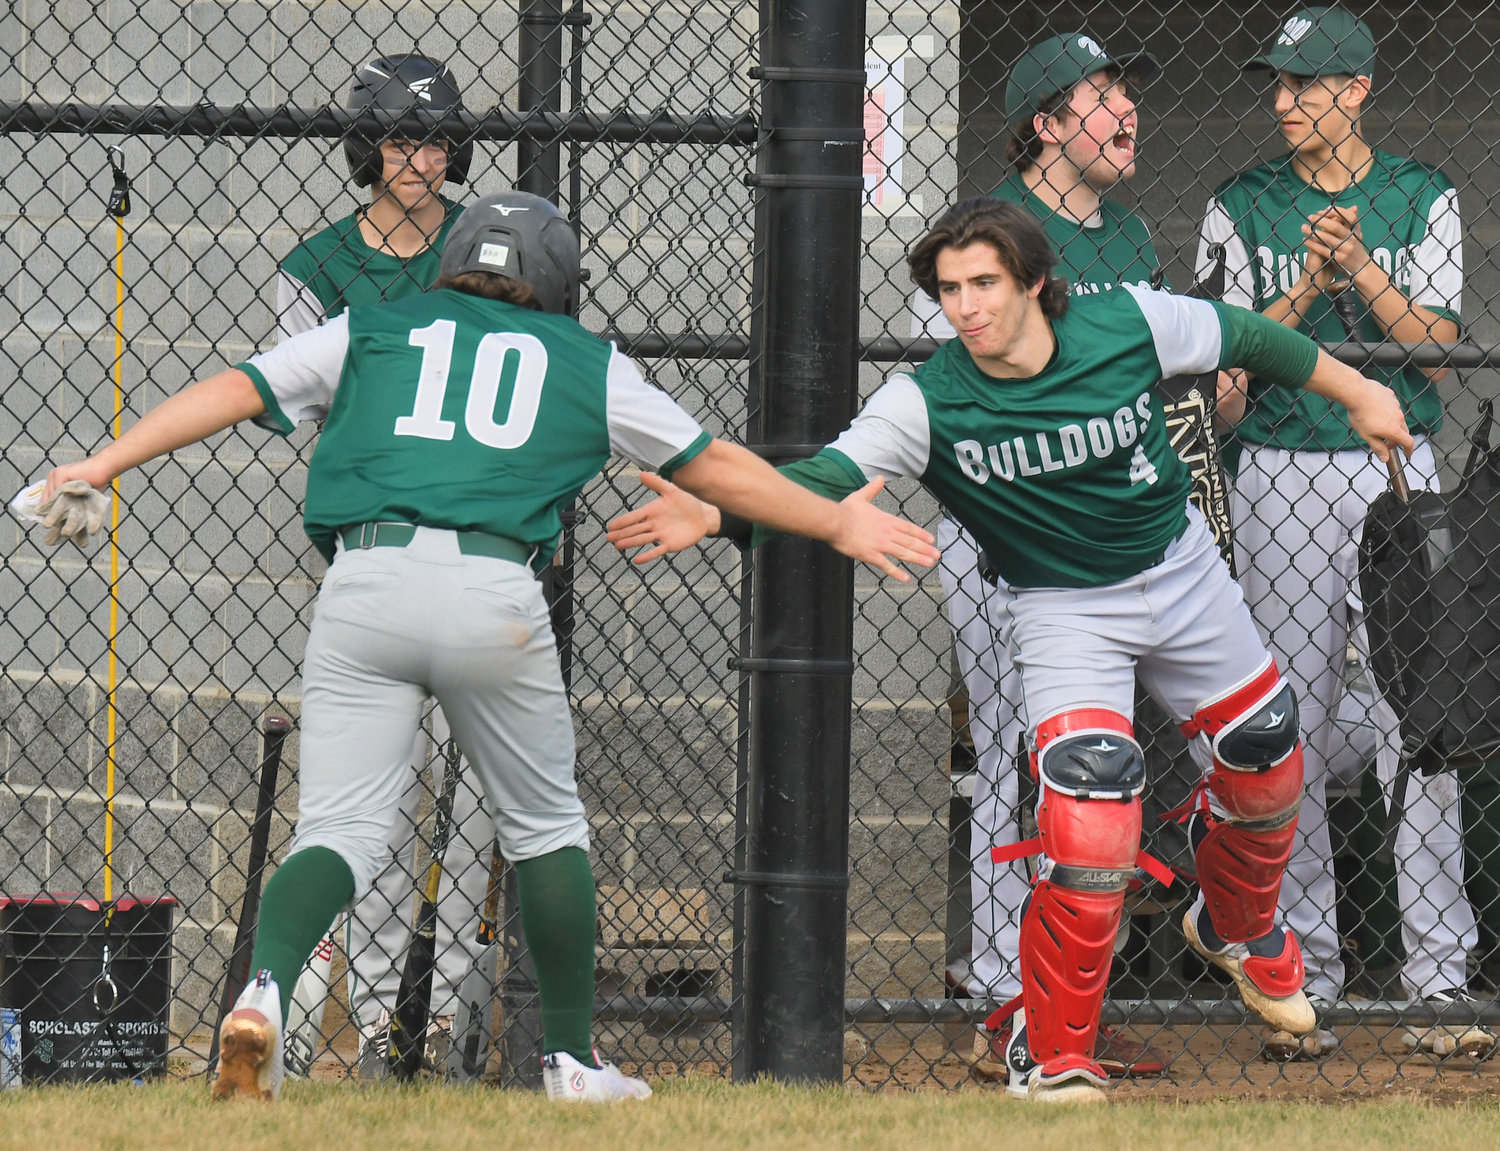 STRIKING FIRST — Westmoreland’s Mike Scalise, left, celebrates with catcher Caleb Miller after he scored a run in the first inning of the team’s 11-2 win at home Tuesday against Oriskany.